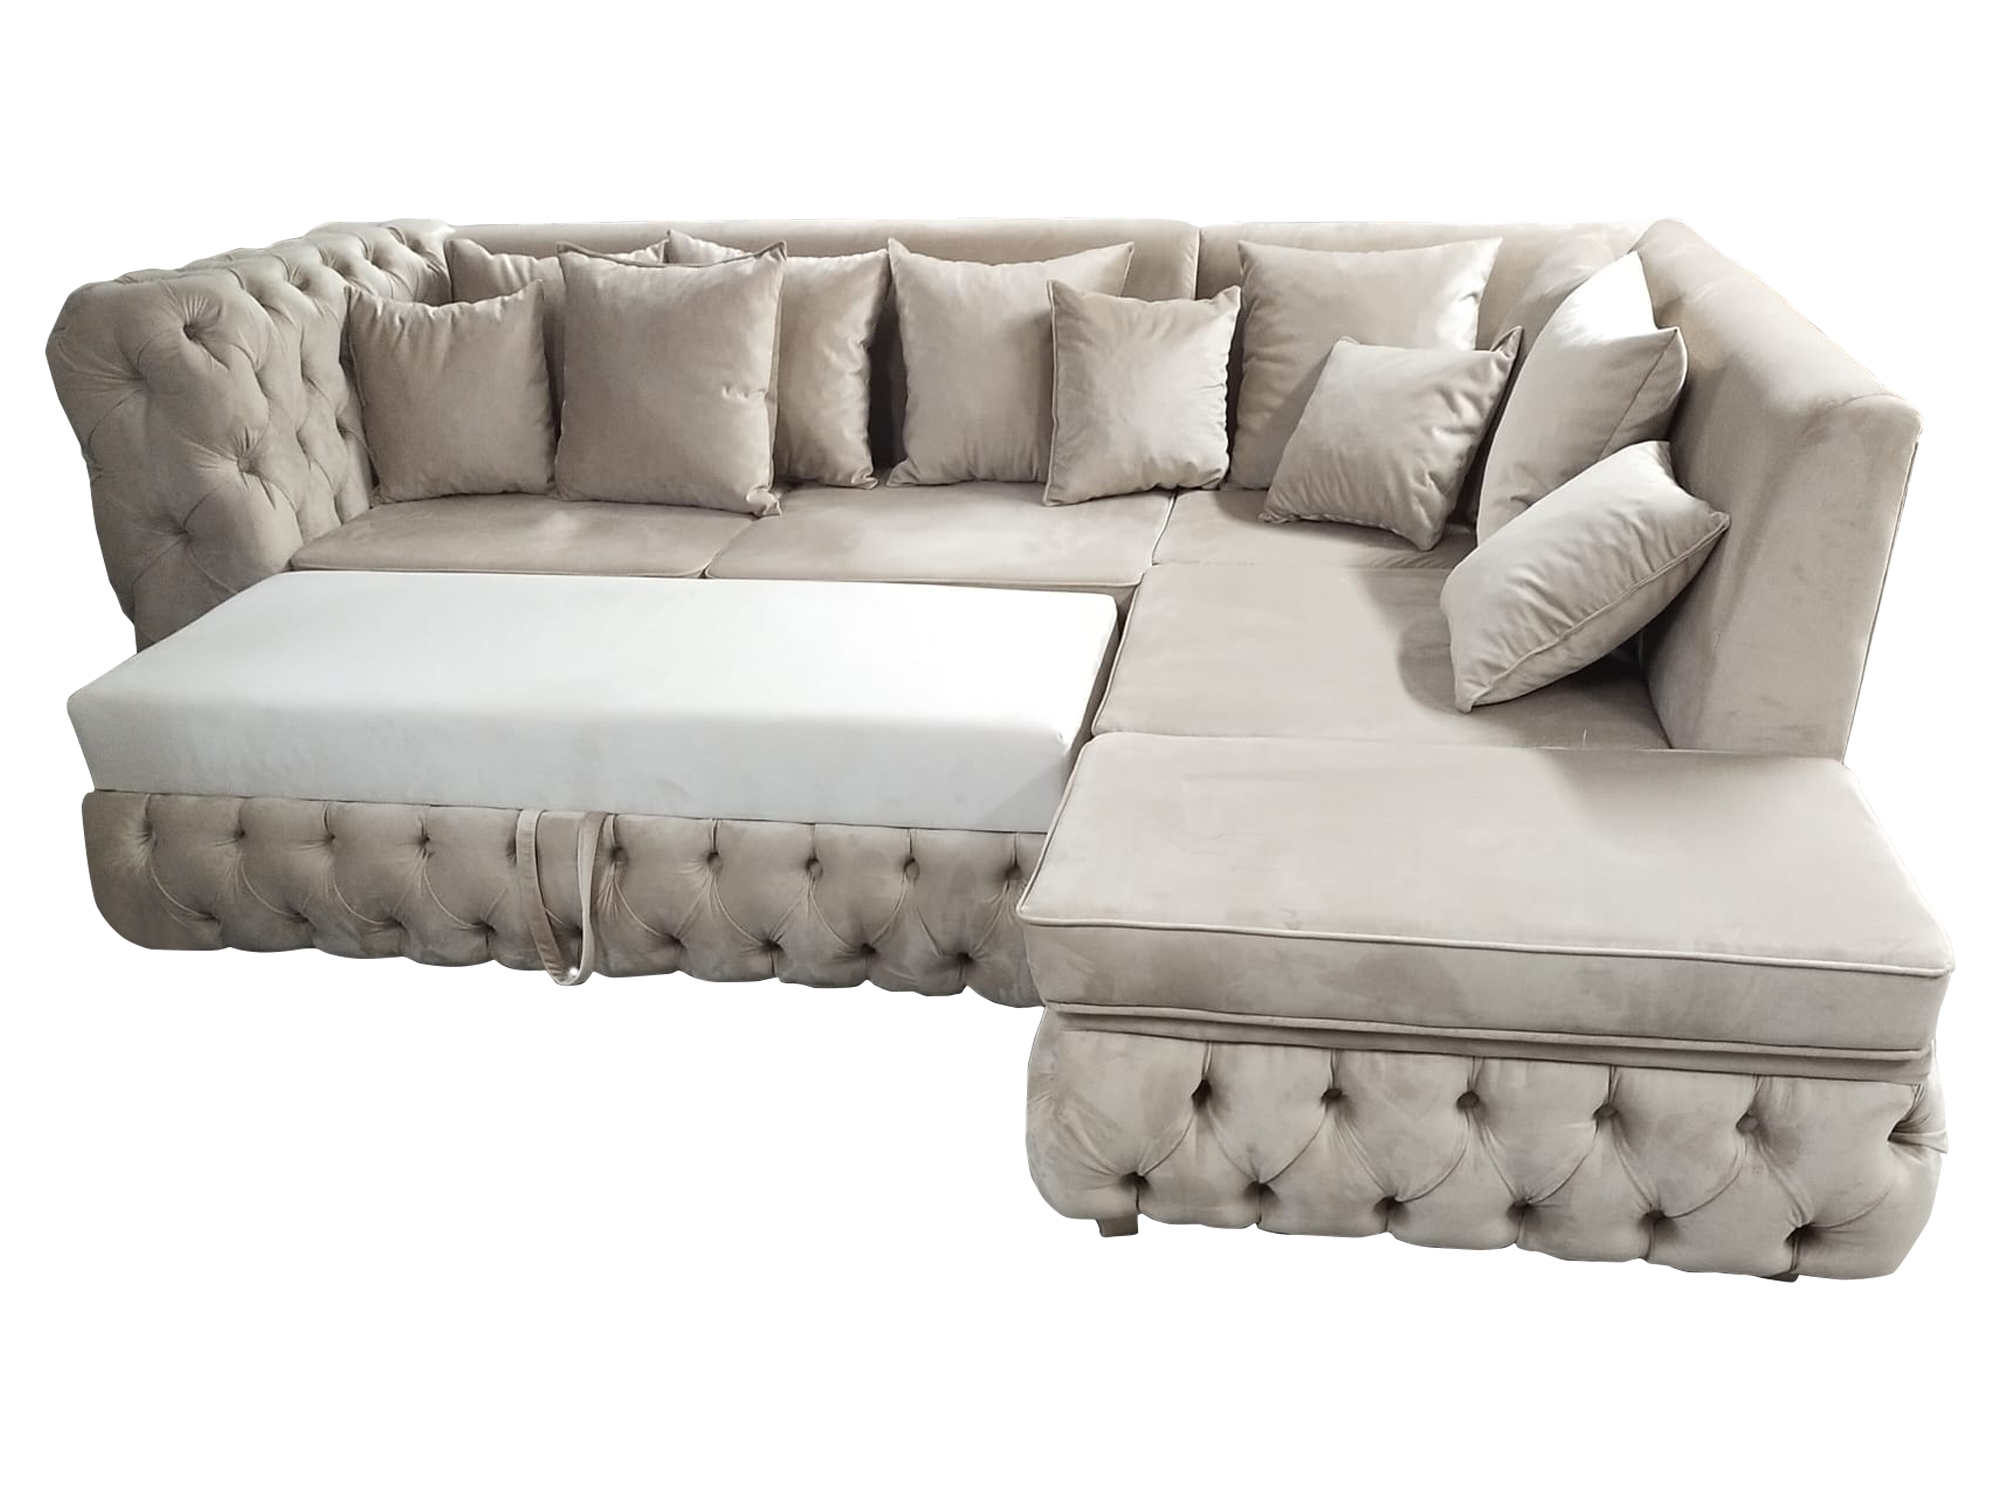 Chesterfield Corner Sofa L-shape with Bed Function Textile Luxury Sofa 340x220